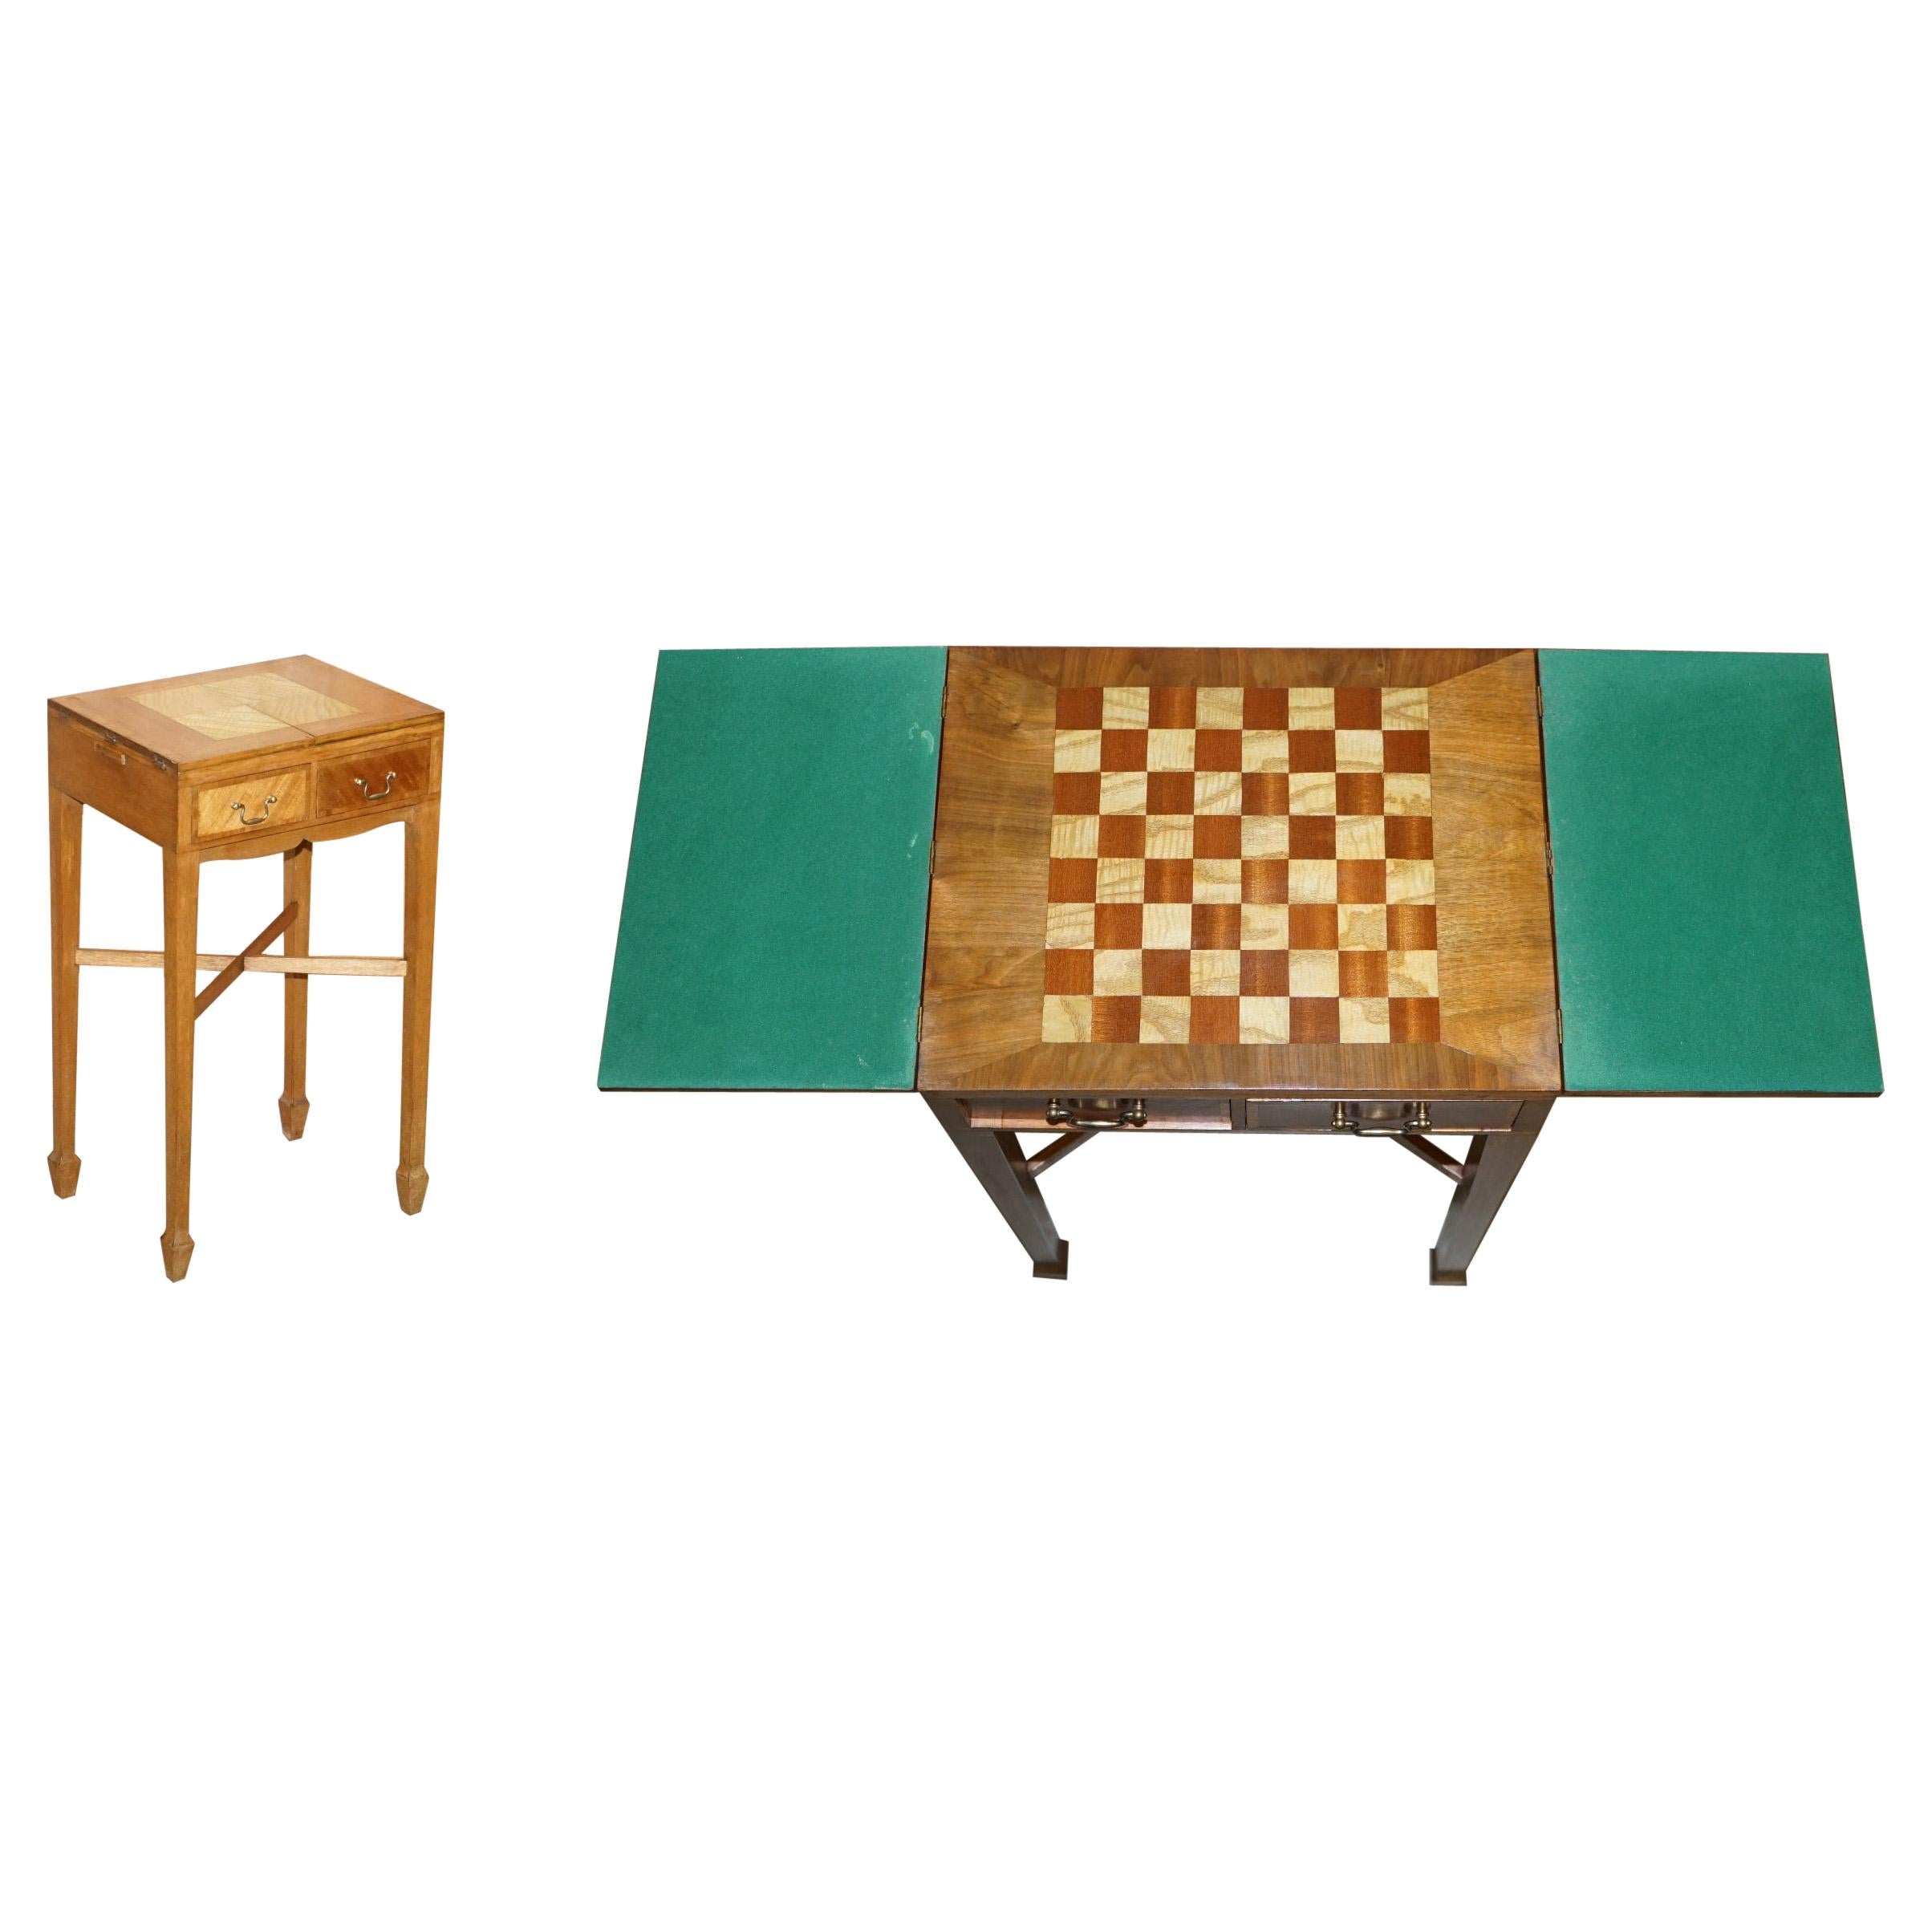 Vintage Walnut Satinwood Games Card Side Table, Fold Out Chess Board & Drawers For Sale